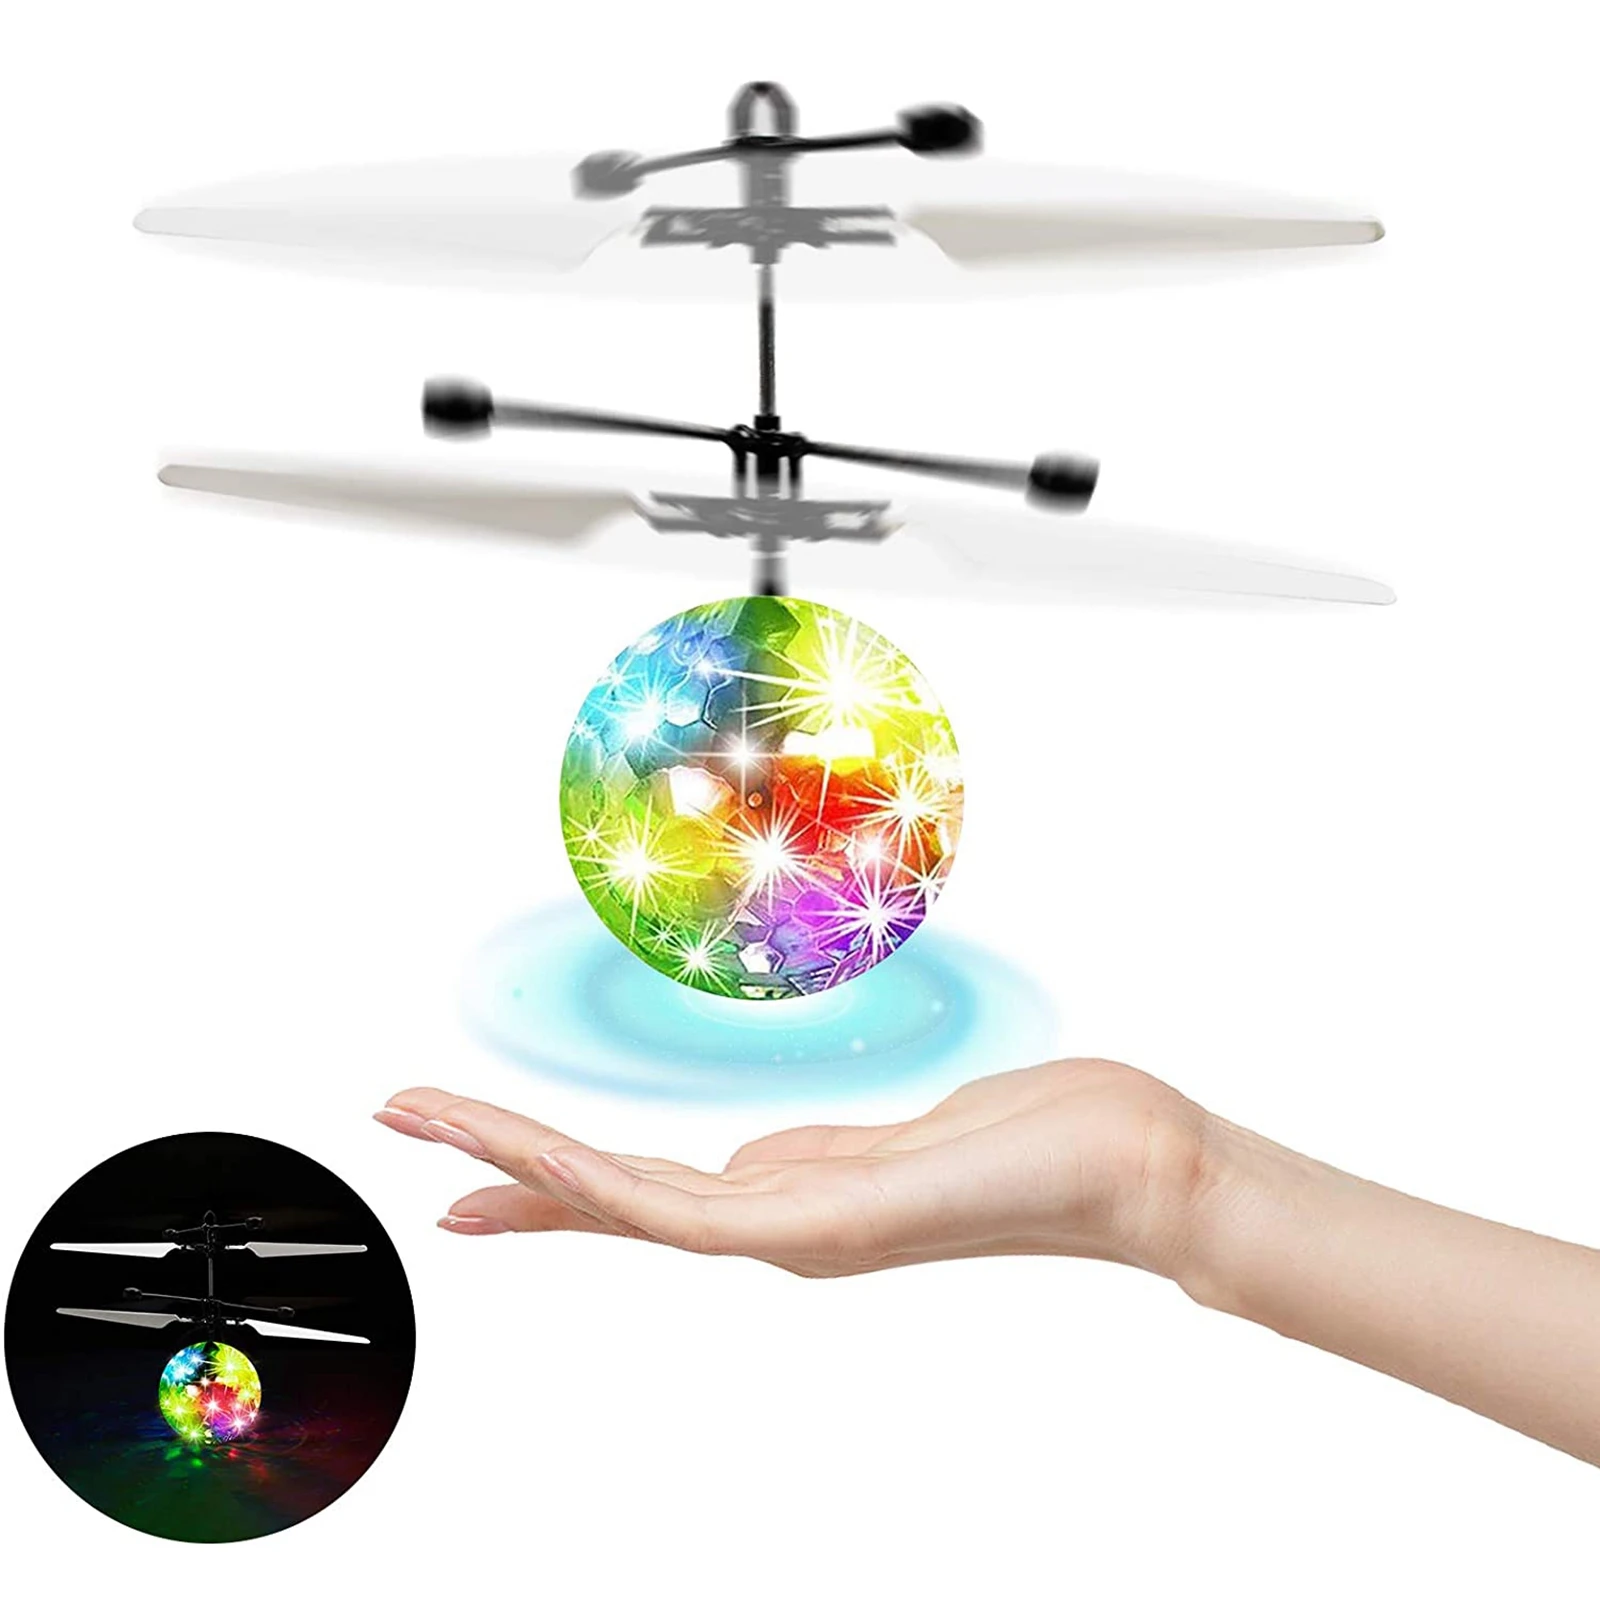 Flying Ball Toy Hand Induction Rc Toys Mini Ball Drone Helicopter